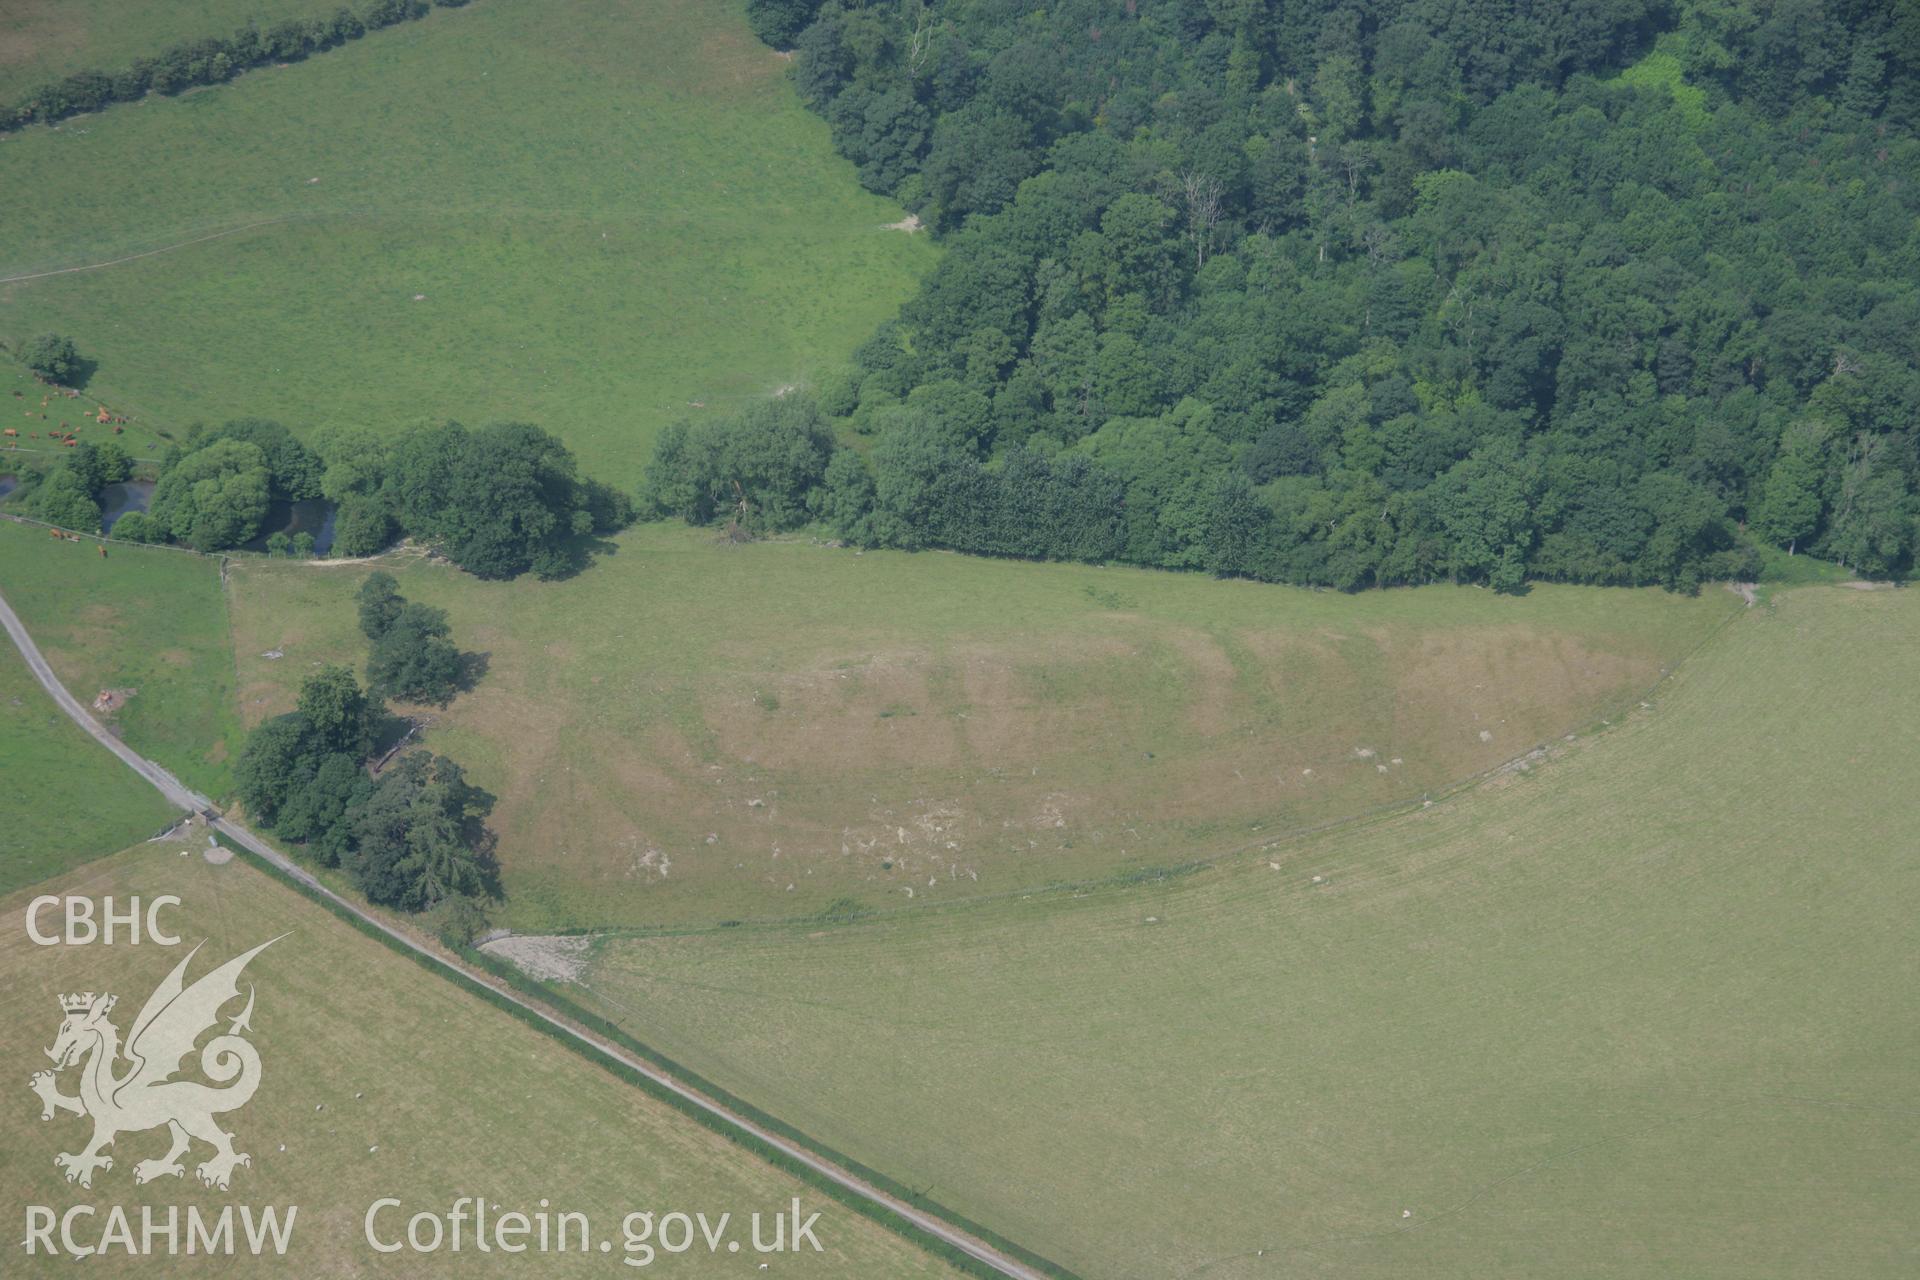 RCAHMW colour oblique aerial photograph of Plas Uchaf Enclosure. Taken on 04 July 2006 by Toby Driver.